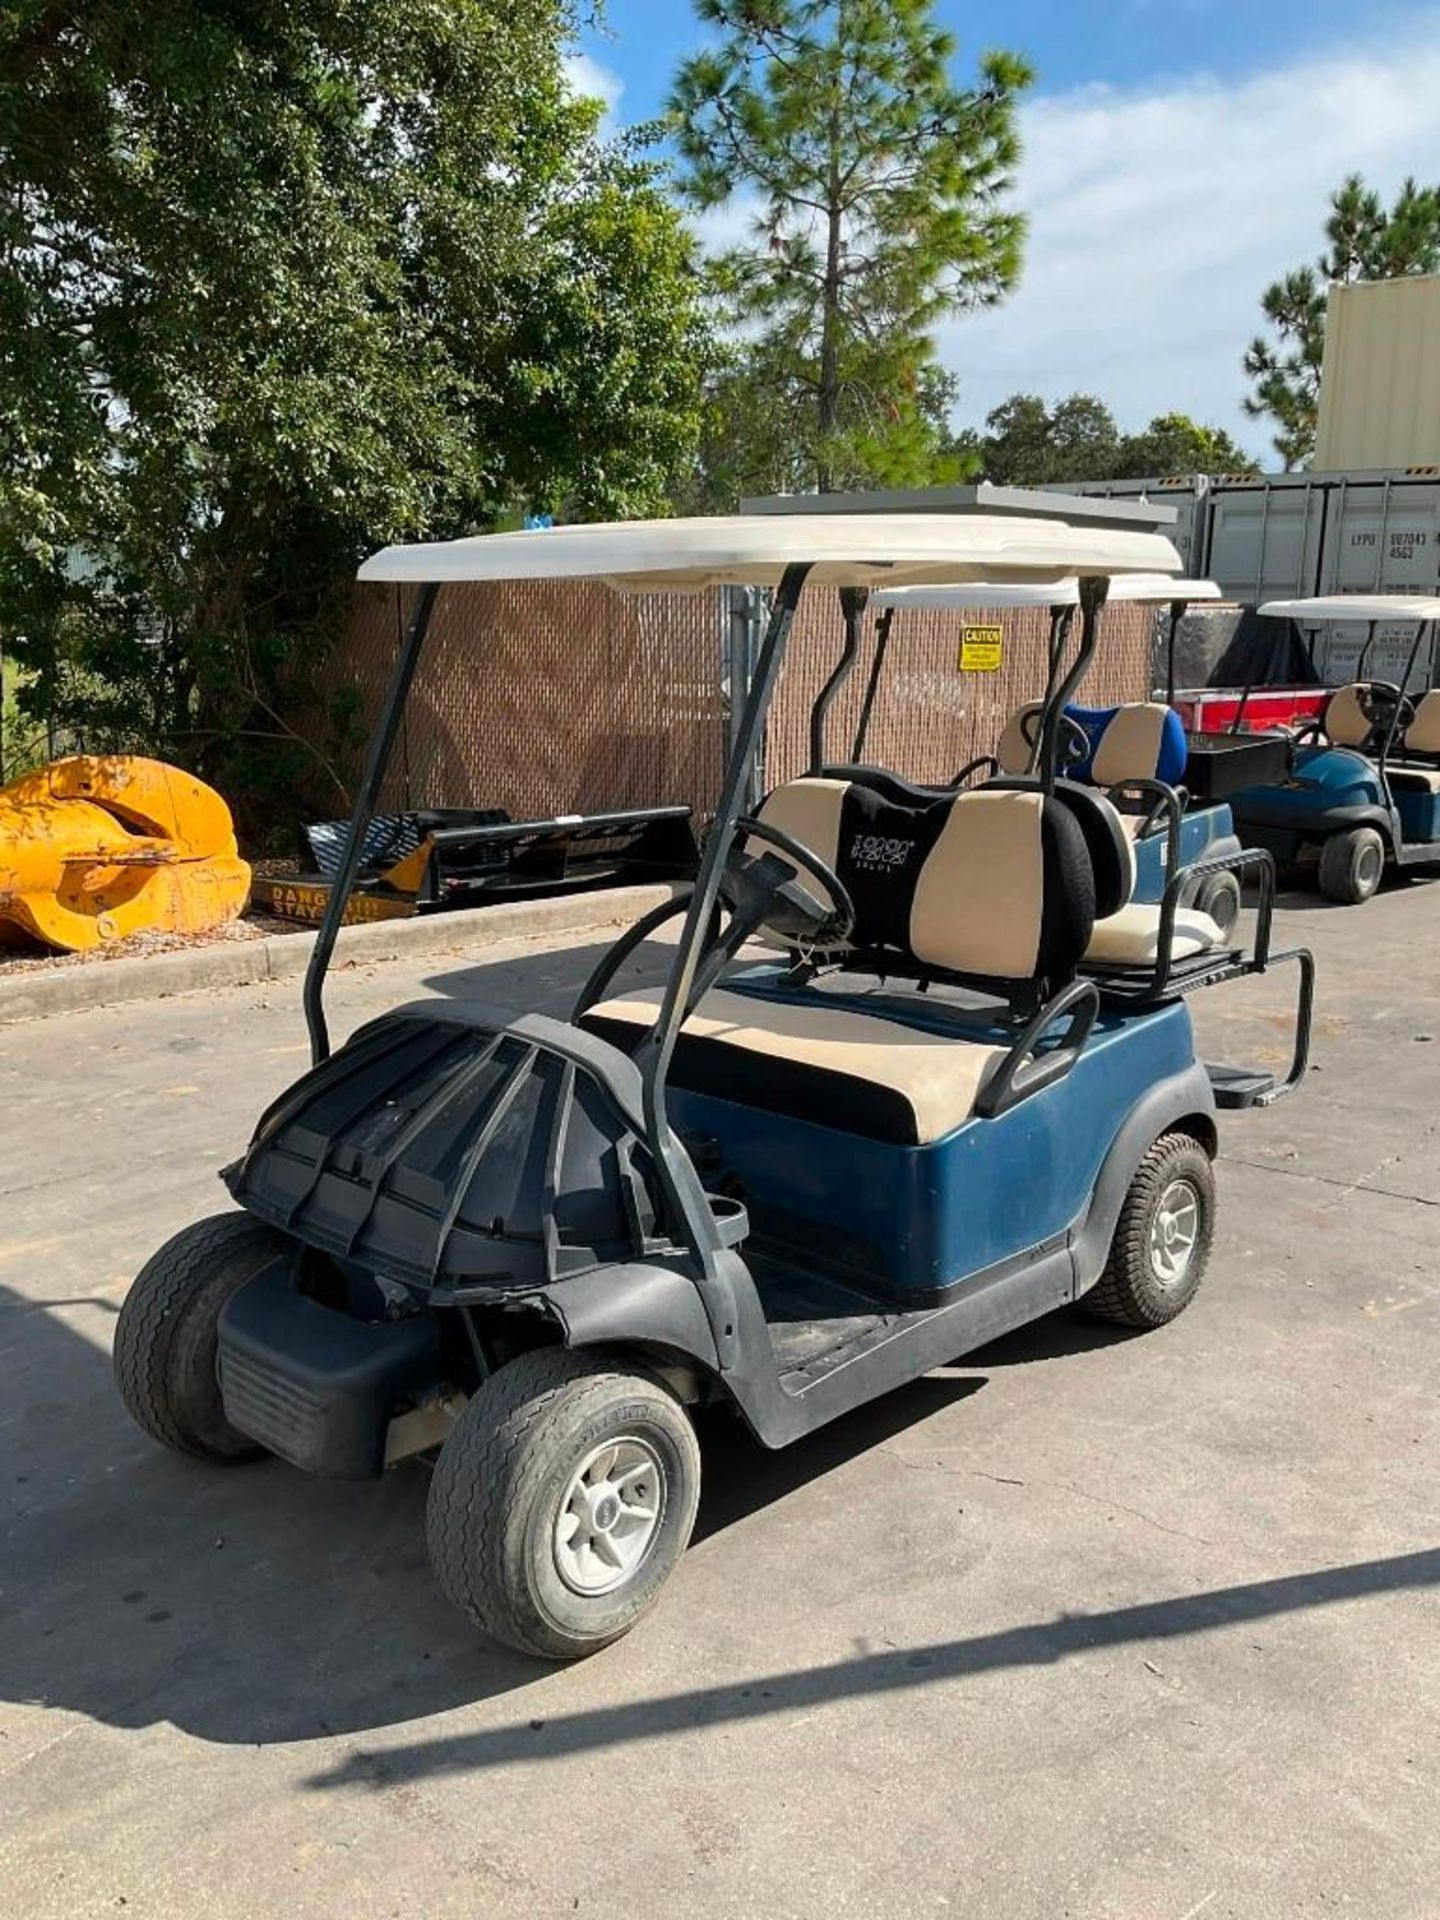 CLUB CAR GOLF CART, ELECTRIC, 48 VOLTS, BACK SEAT FOLDS OUT TO FLAT BED APPROX 34” L x 42” W ,BRAND